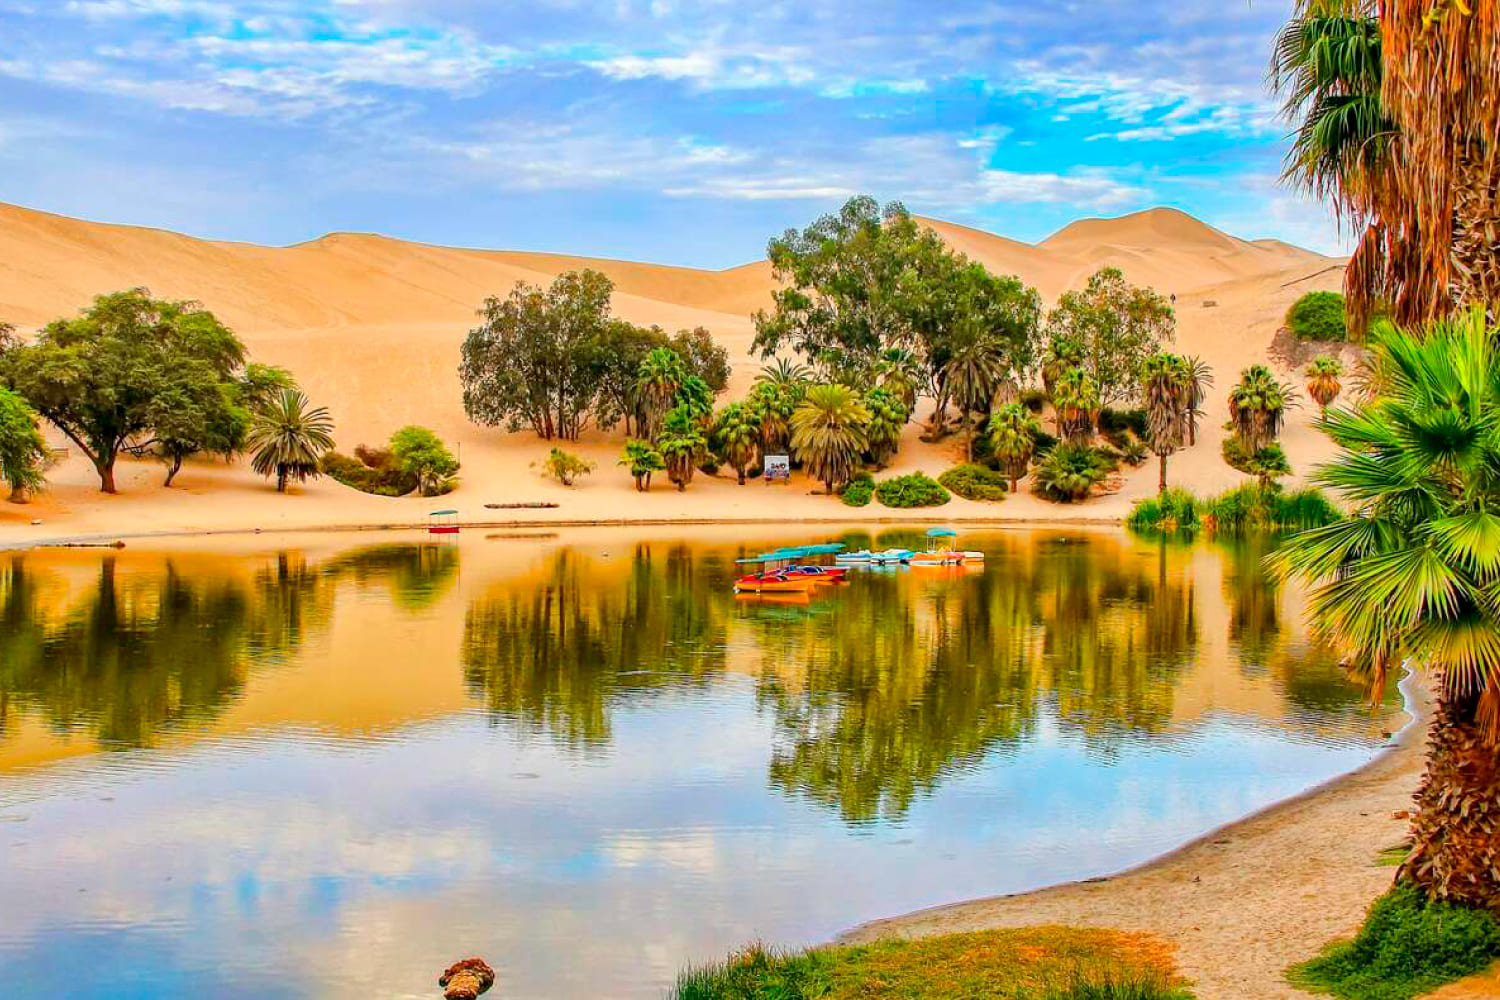 LEGEND OF THE HUACACHINA OASIS